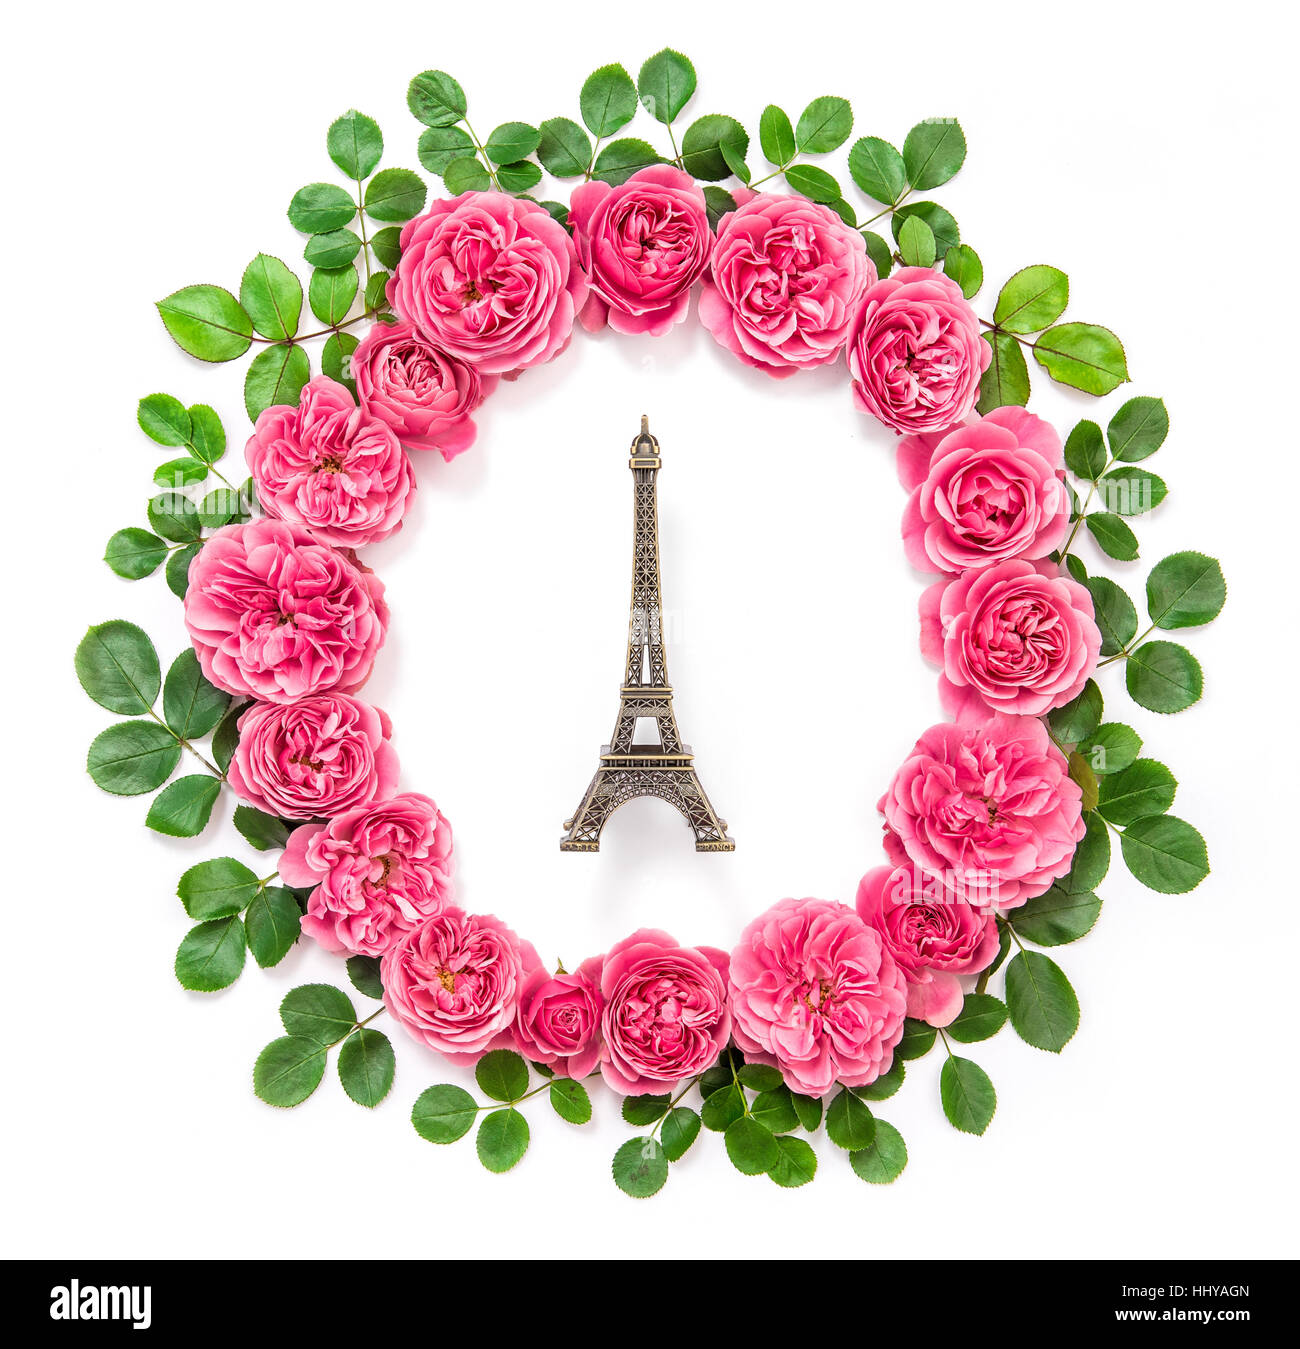 Pink rose flowers with Eiffel tower from Paris. Roses with green leaves ...